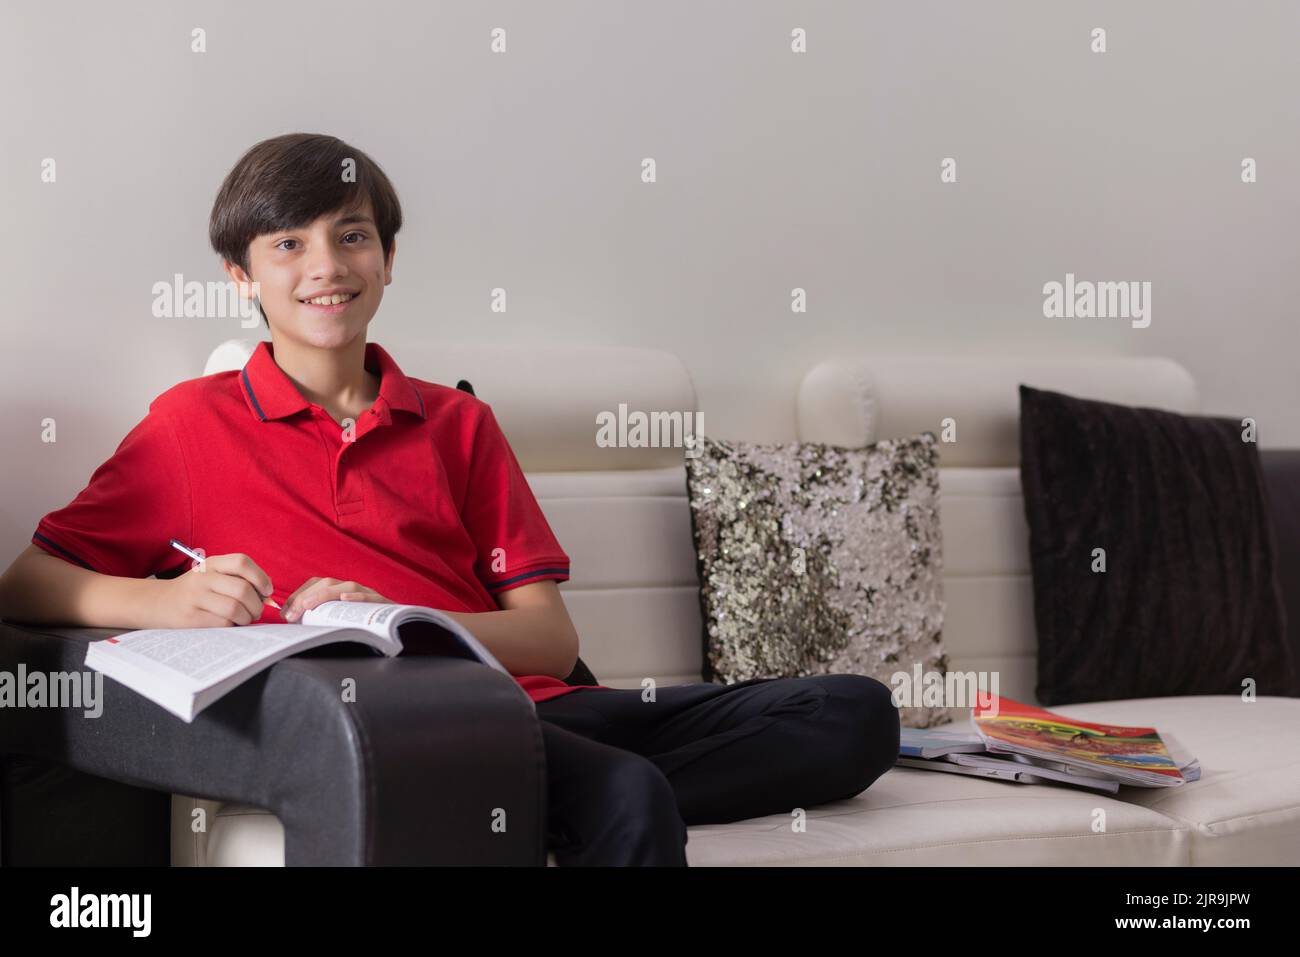 Portrait of cheerful young boy studying on sofa at home Stock Photo